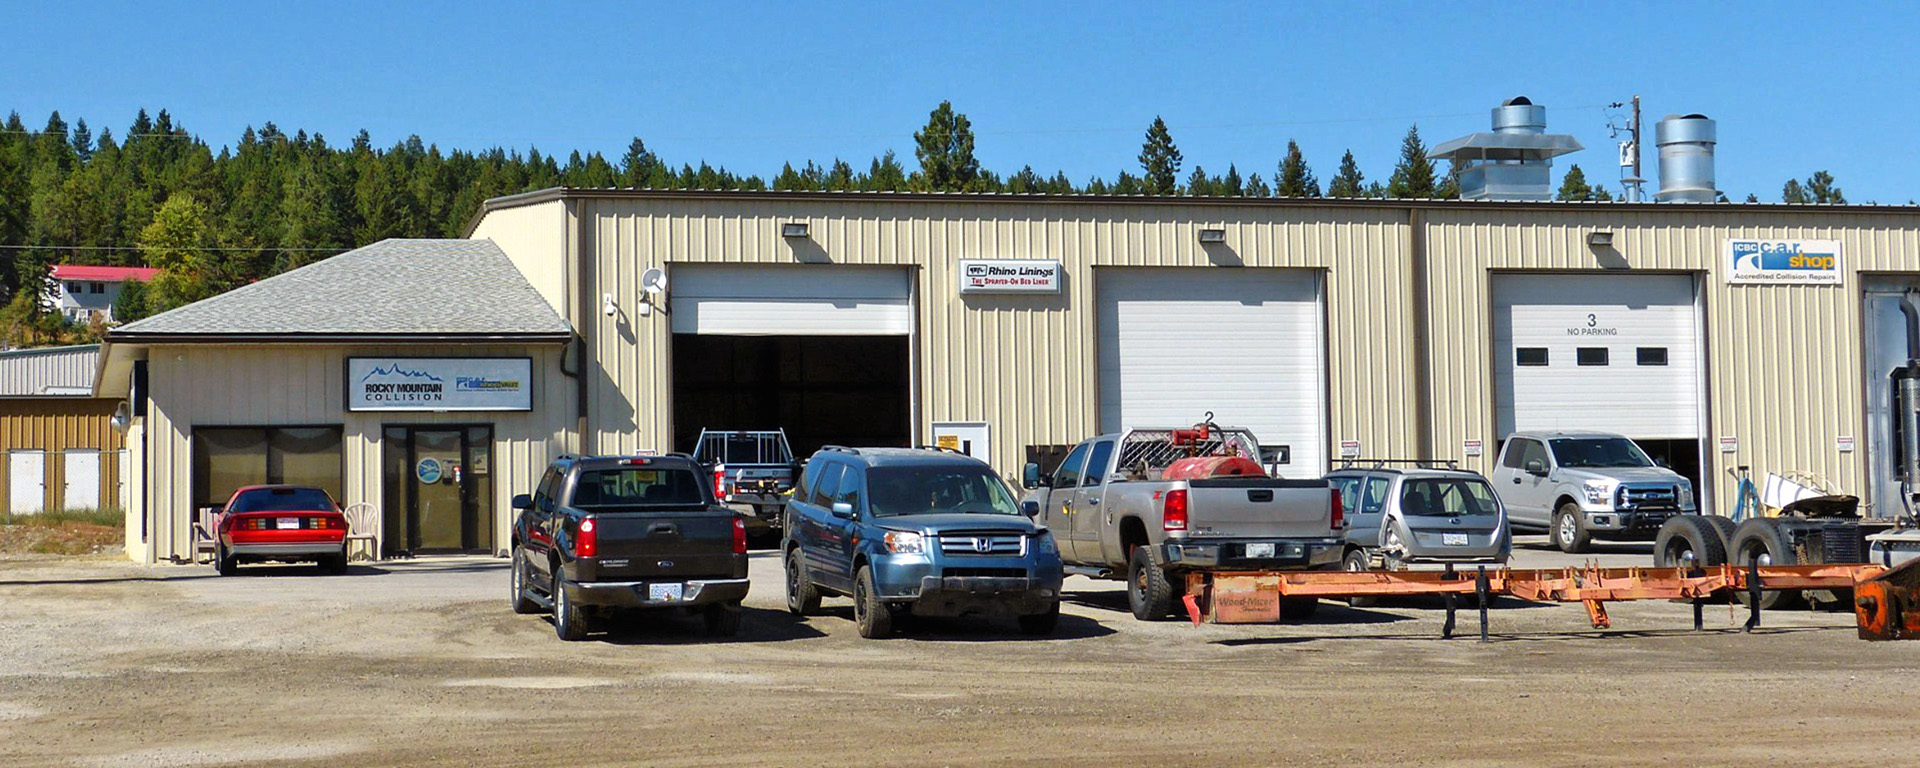 Exterior of Rocky Mountain Collision - an accredited ICBC car shop valet facility 